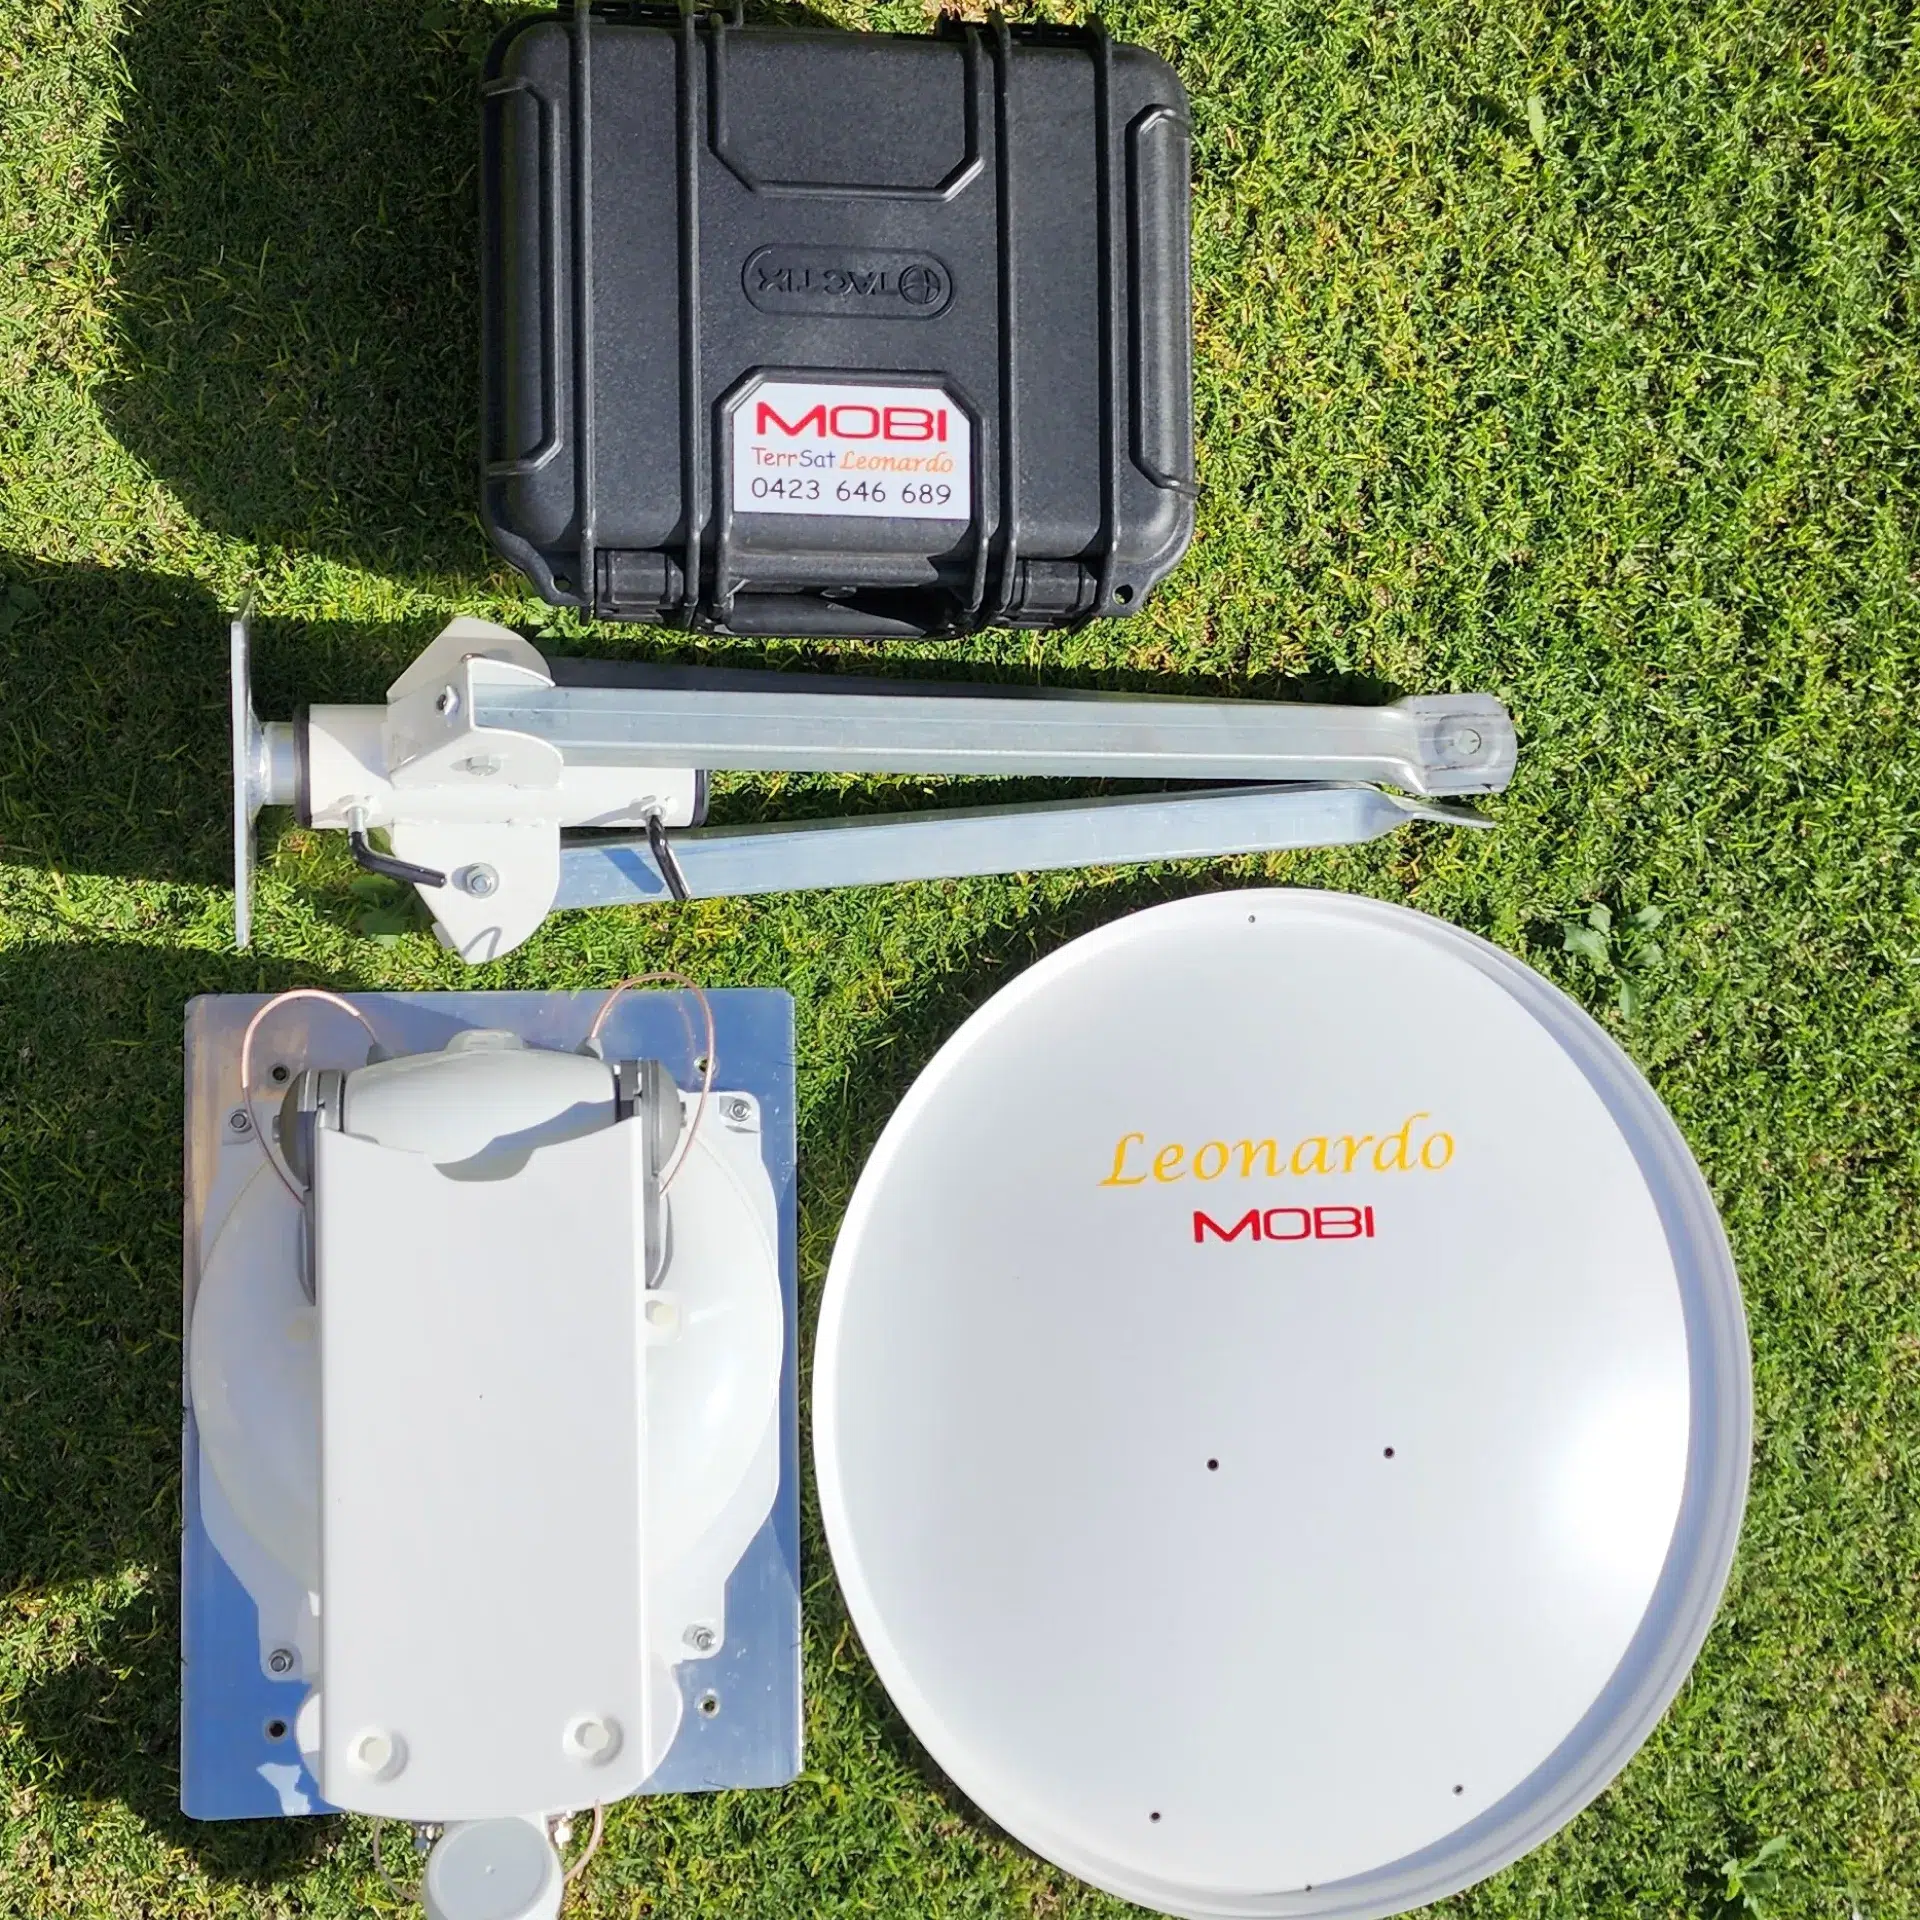 A photo of some equipment on grass, specifically a suitcase and a dis-assembled antenna.